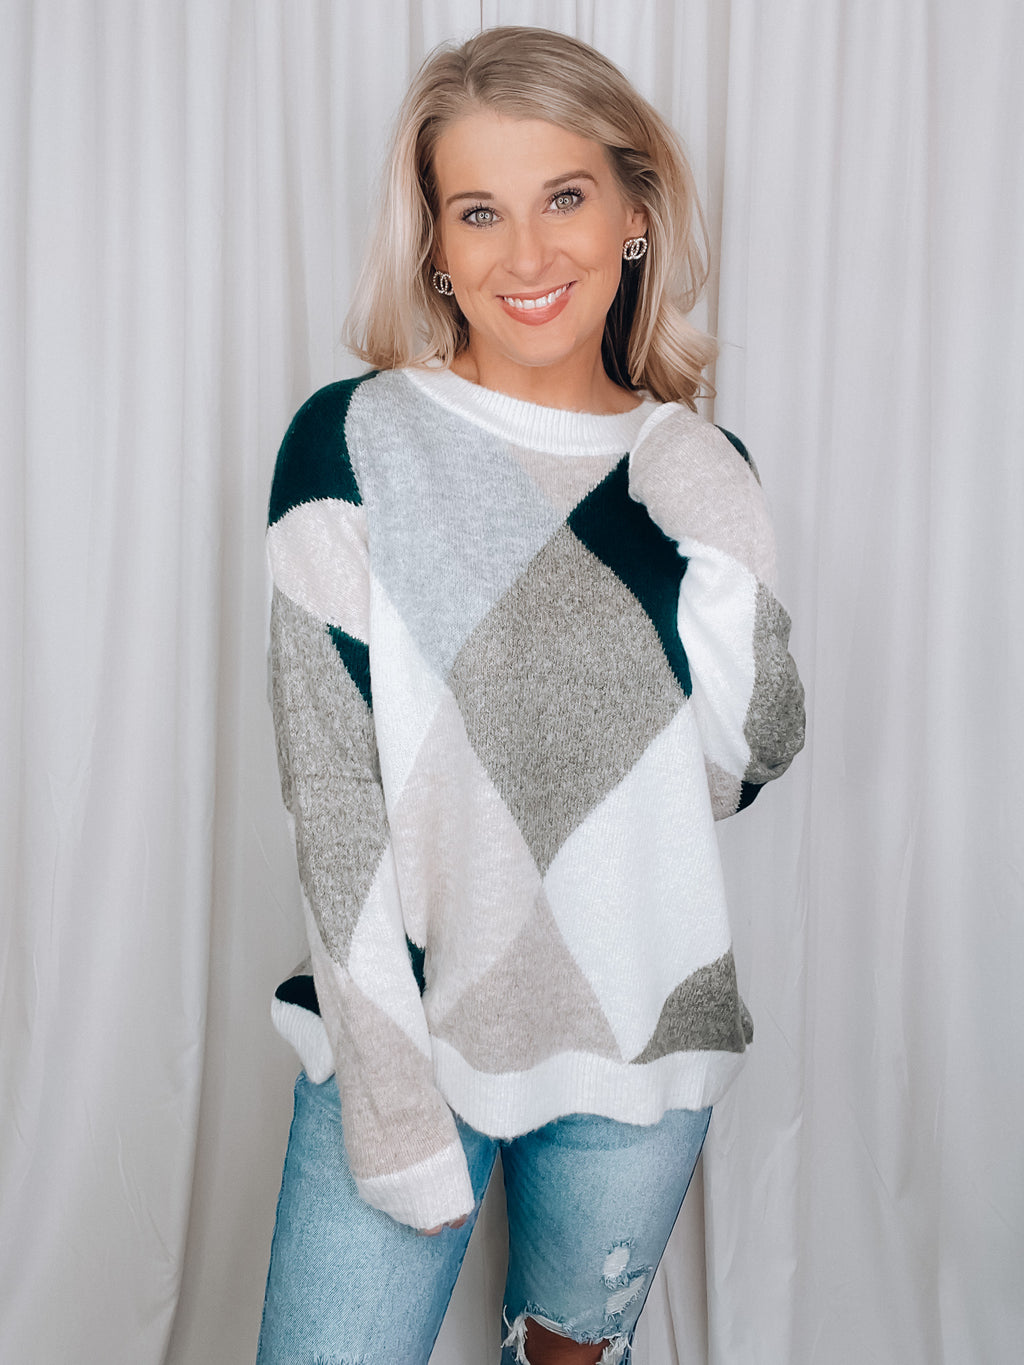 Sweater features a dreamy soft material, long sleeves, diamond pattern with hunter green/olive/grey and taupe tones, color block detail, crew neck line and runs true to size! 